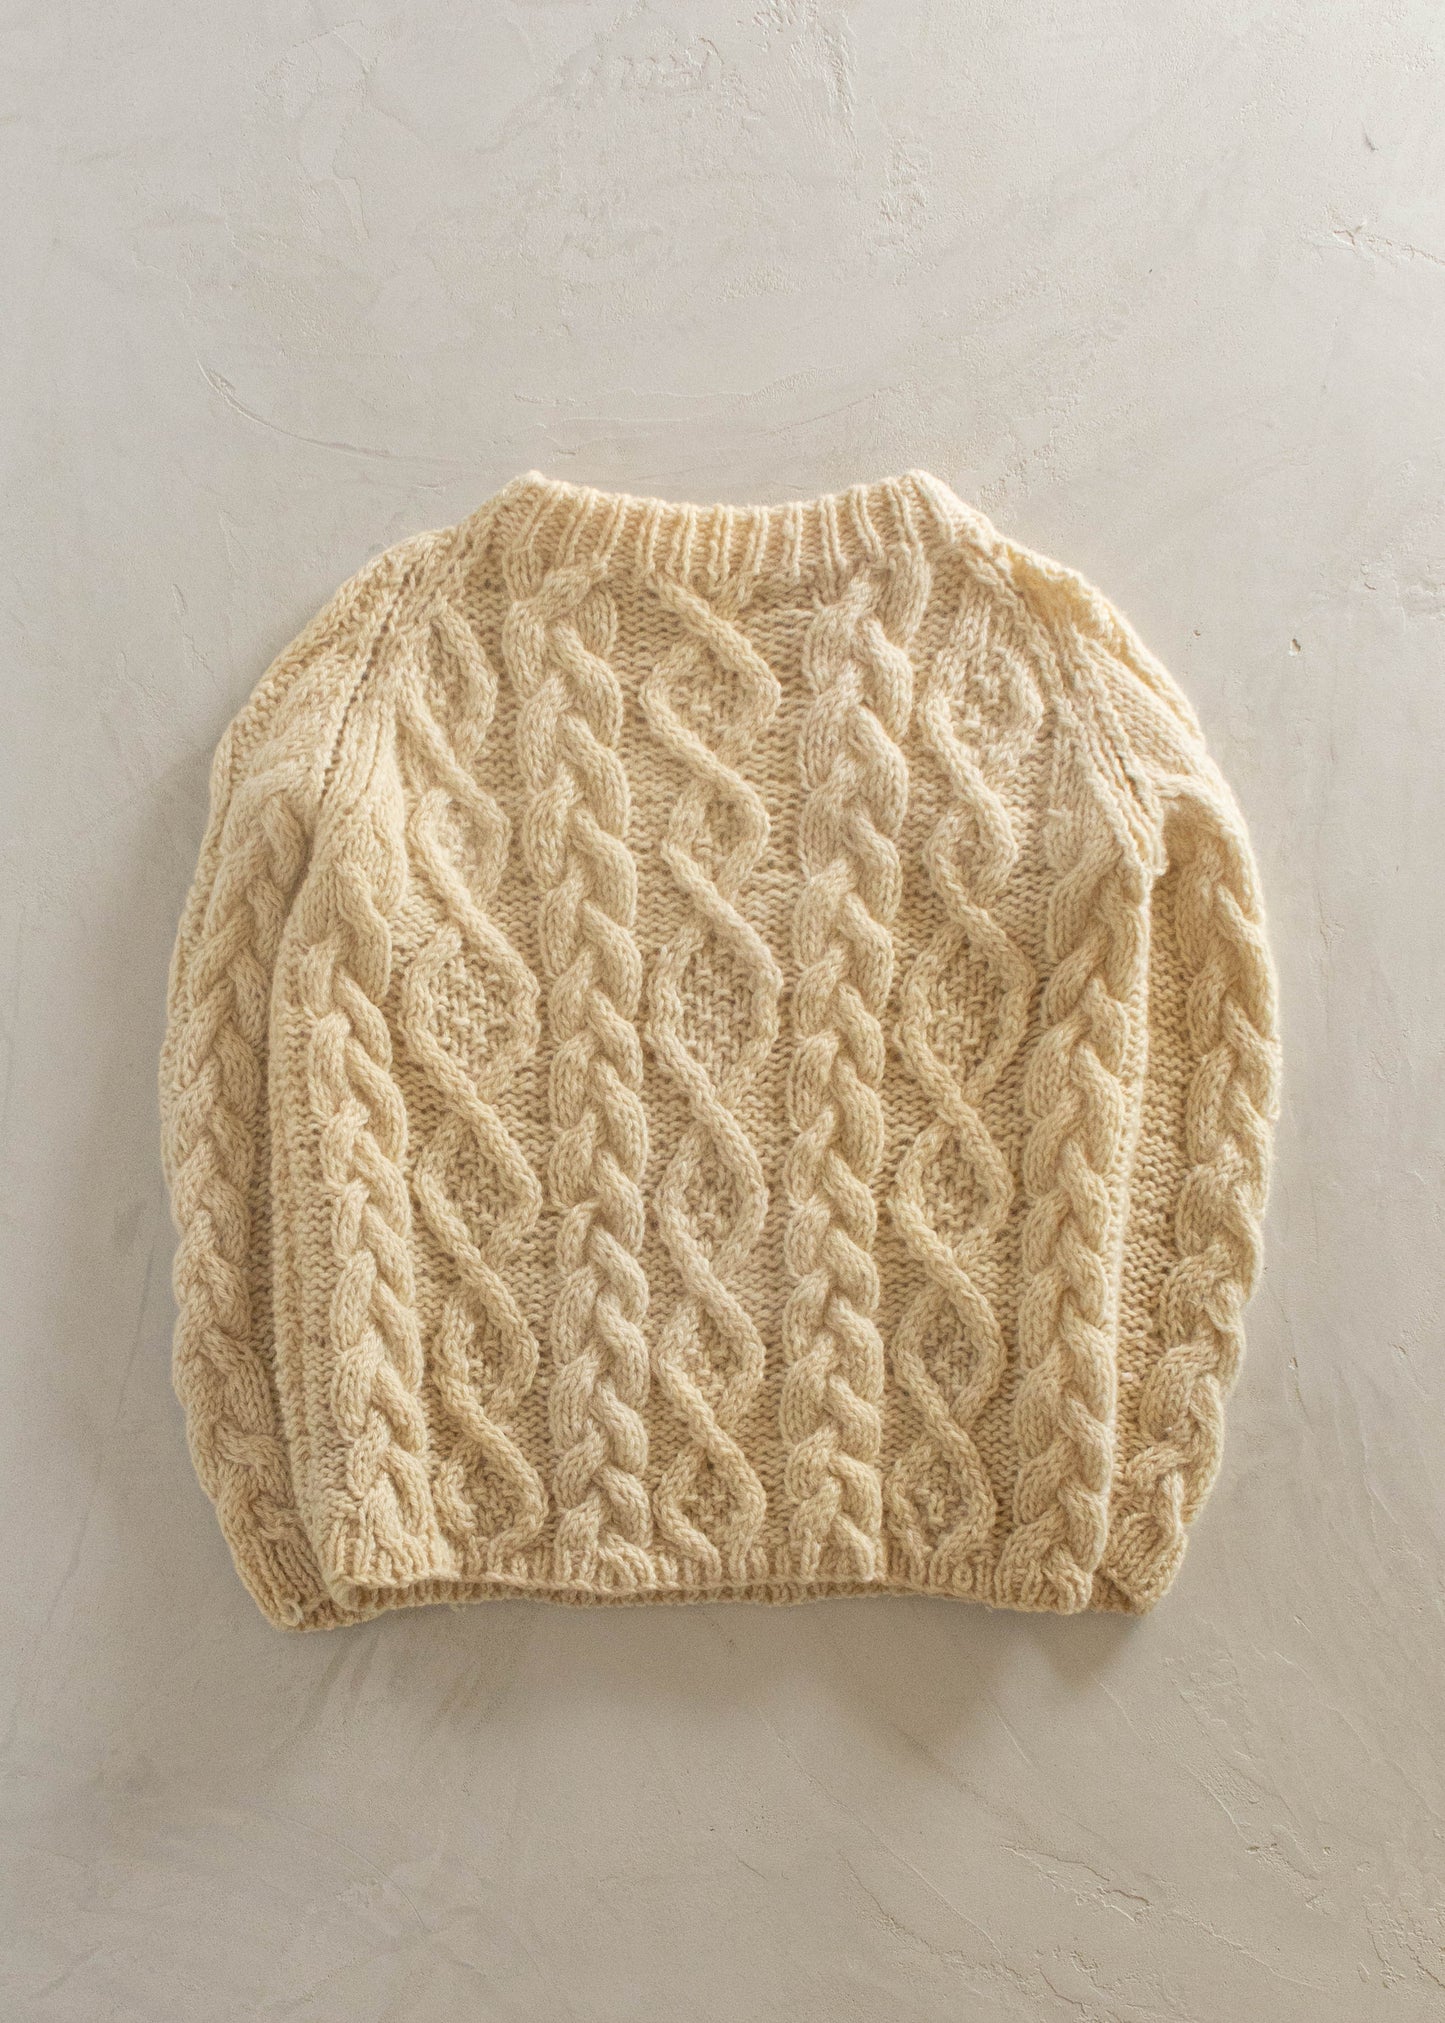 1980s Abraham & Strauss Cable Knit Wool Fisherman Sweater Size M/L